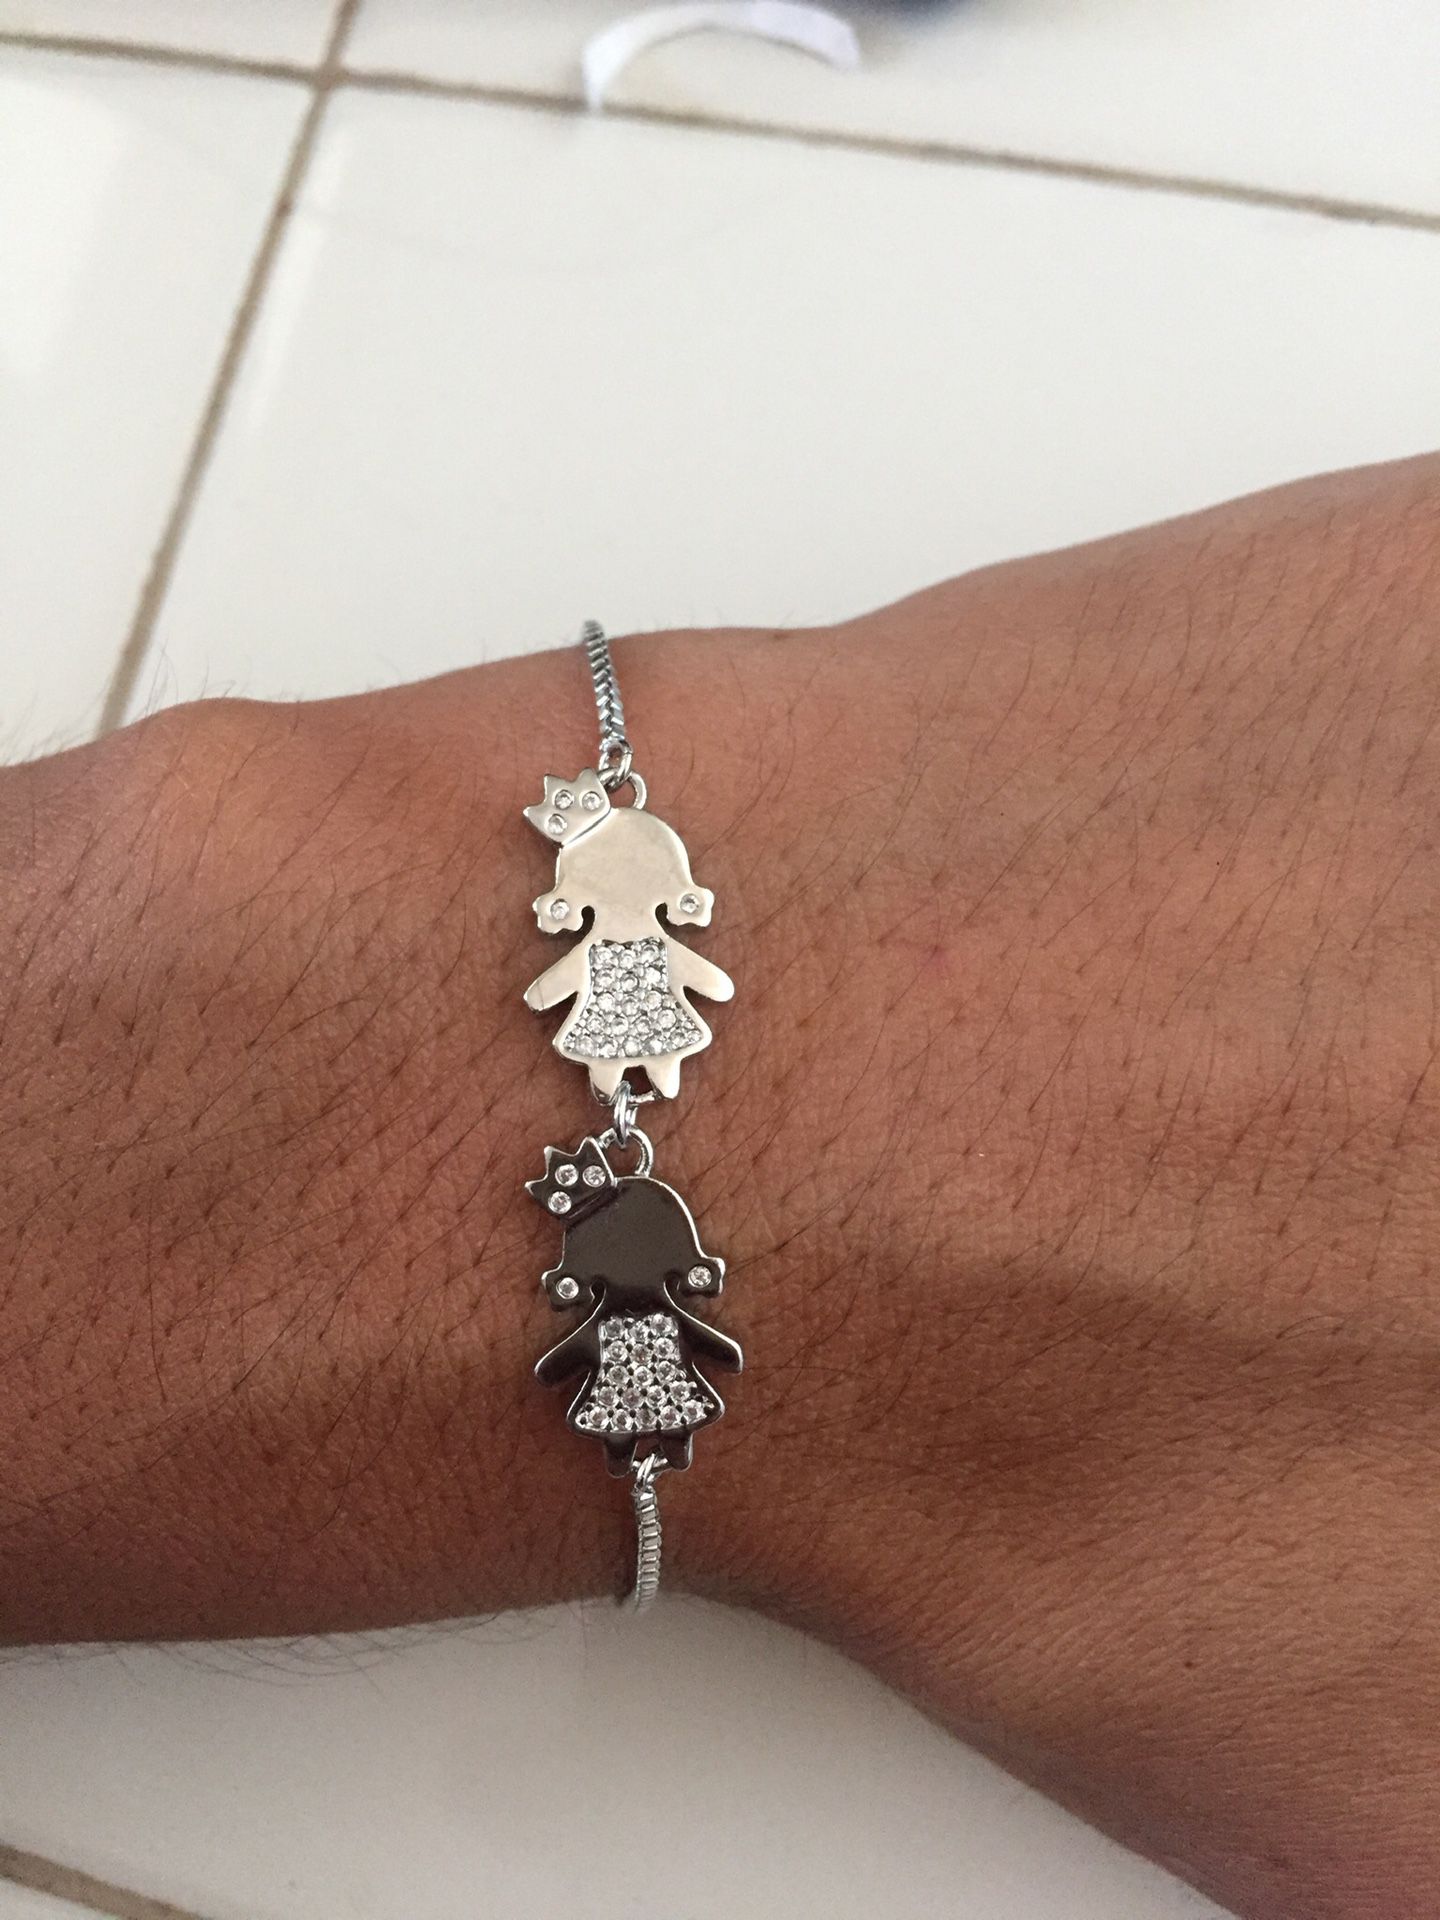 Bracelet with 2 girls charms